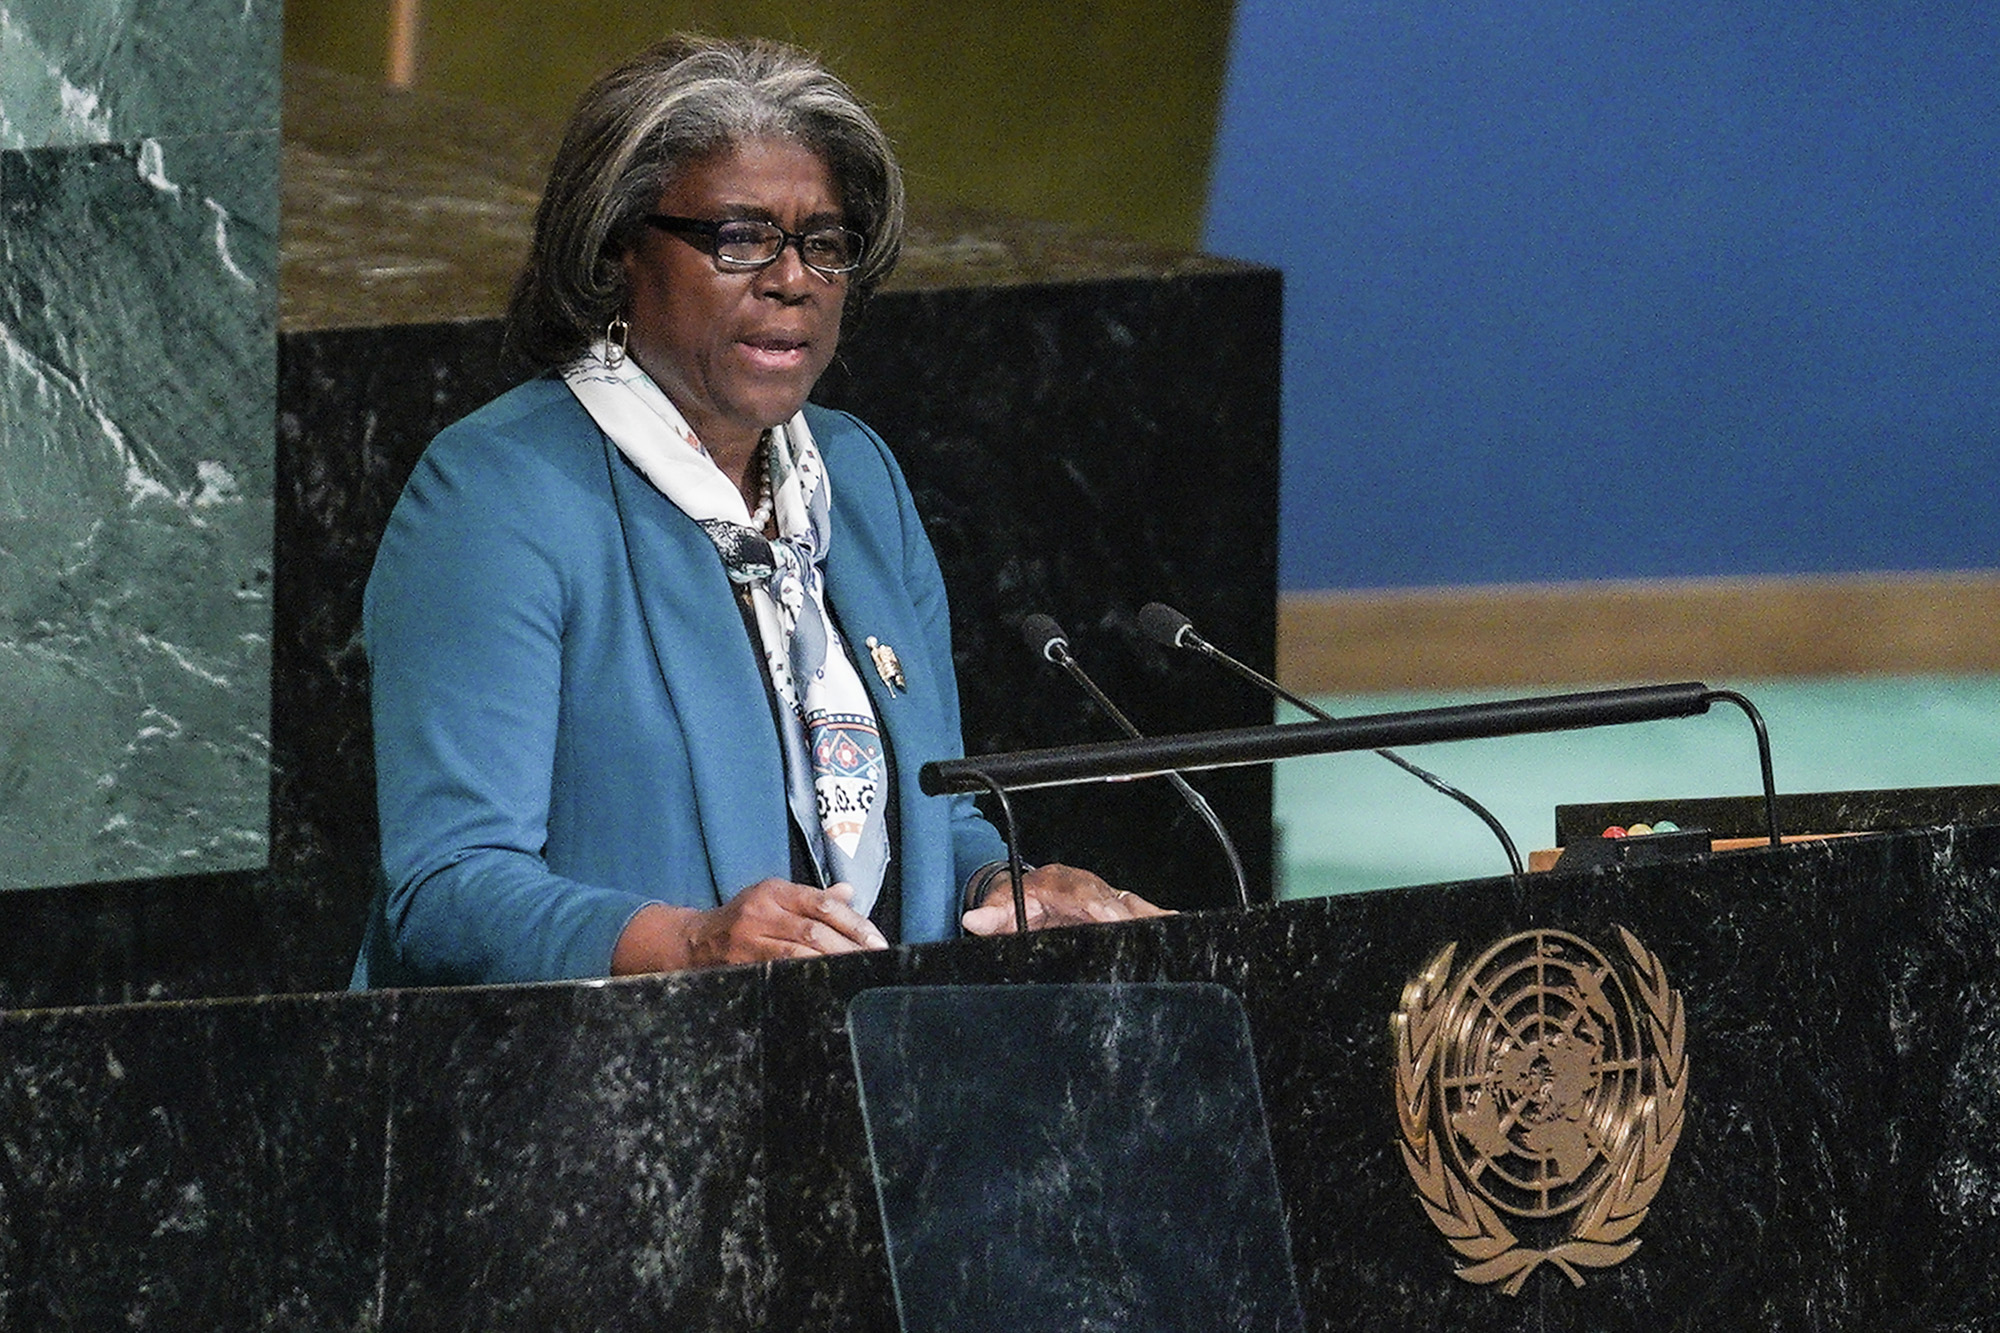 US Ambassador to the United Nations Linda Thomas-Greenfield address the UN General Assembly, before it voted on a resolution condemning Russia's illegal referendum in Ukraine at UN headquarters on Wednesday Oct. 12.